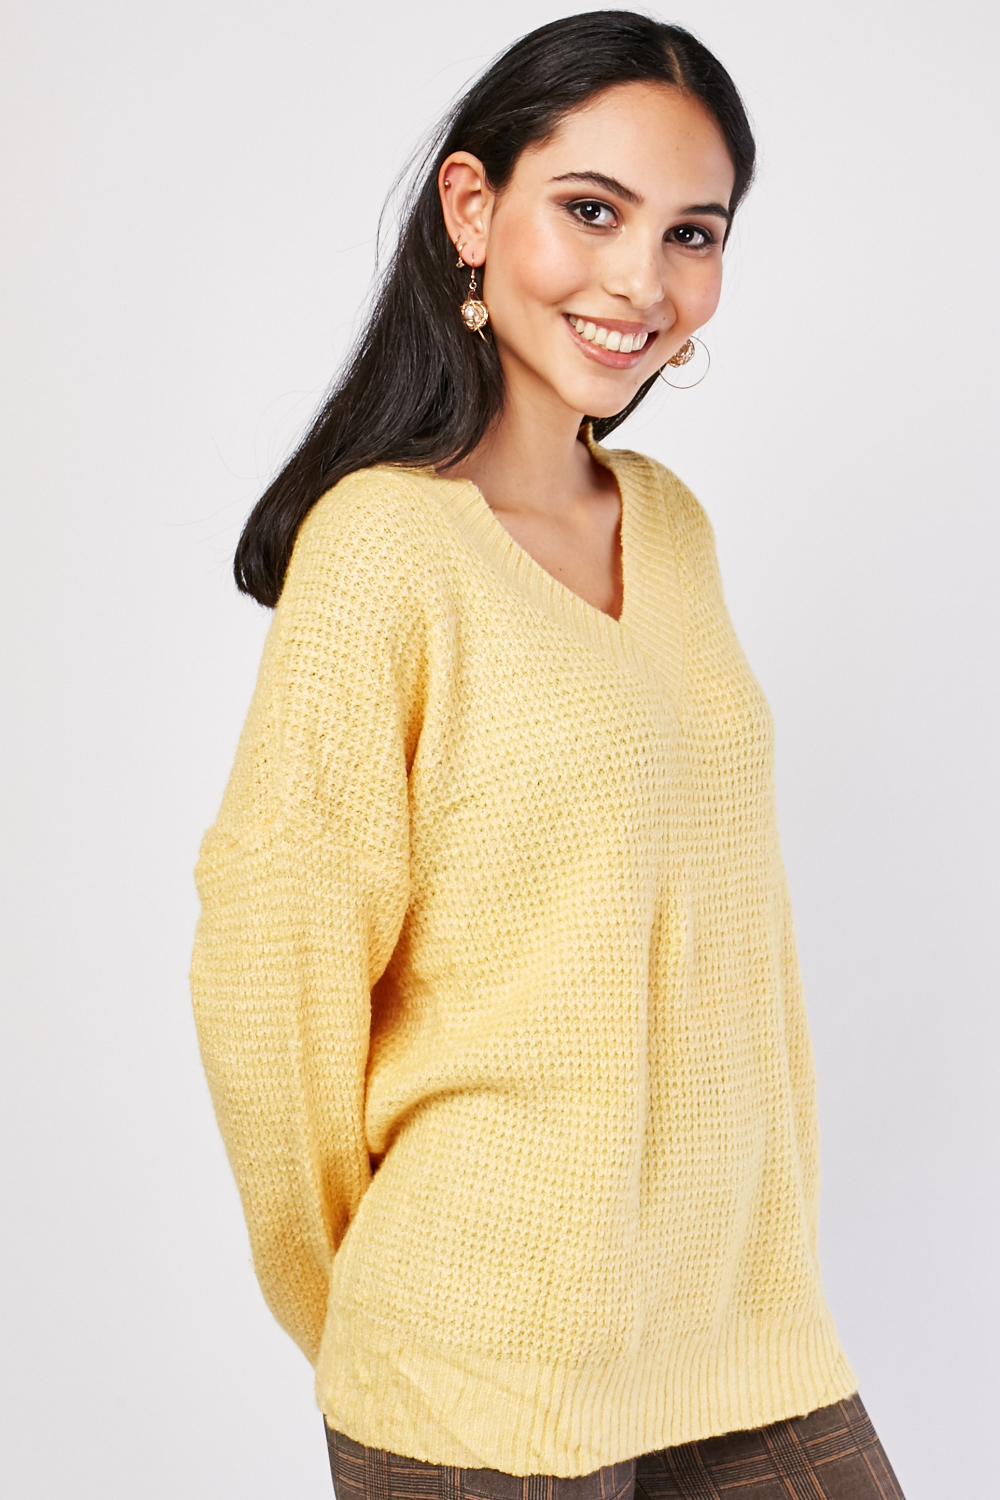 V-Neck Slouchy Knit Jumper - Mauve or Yellow - Just $6